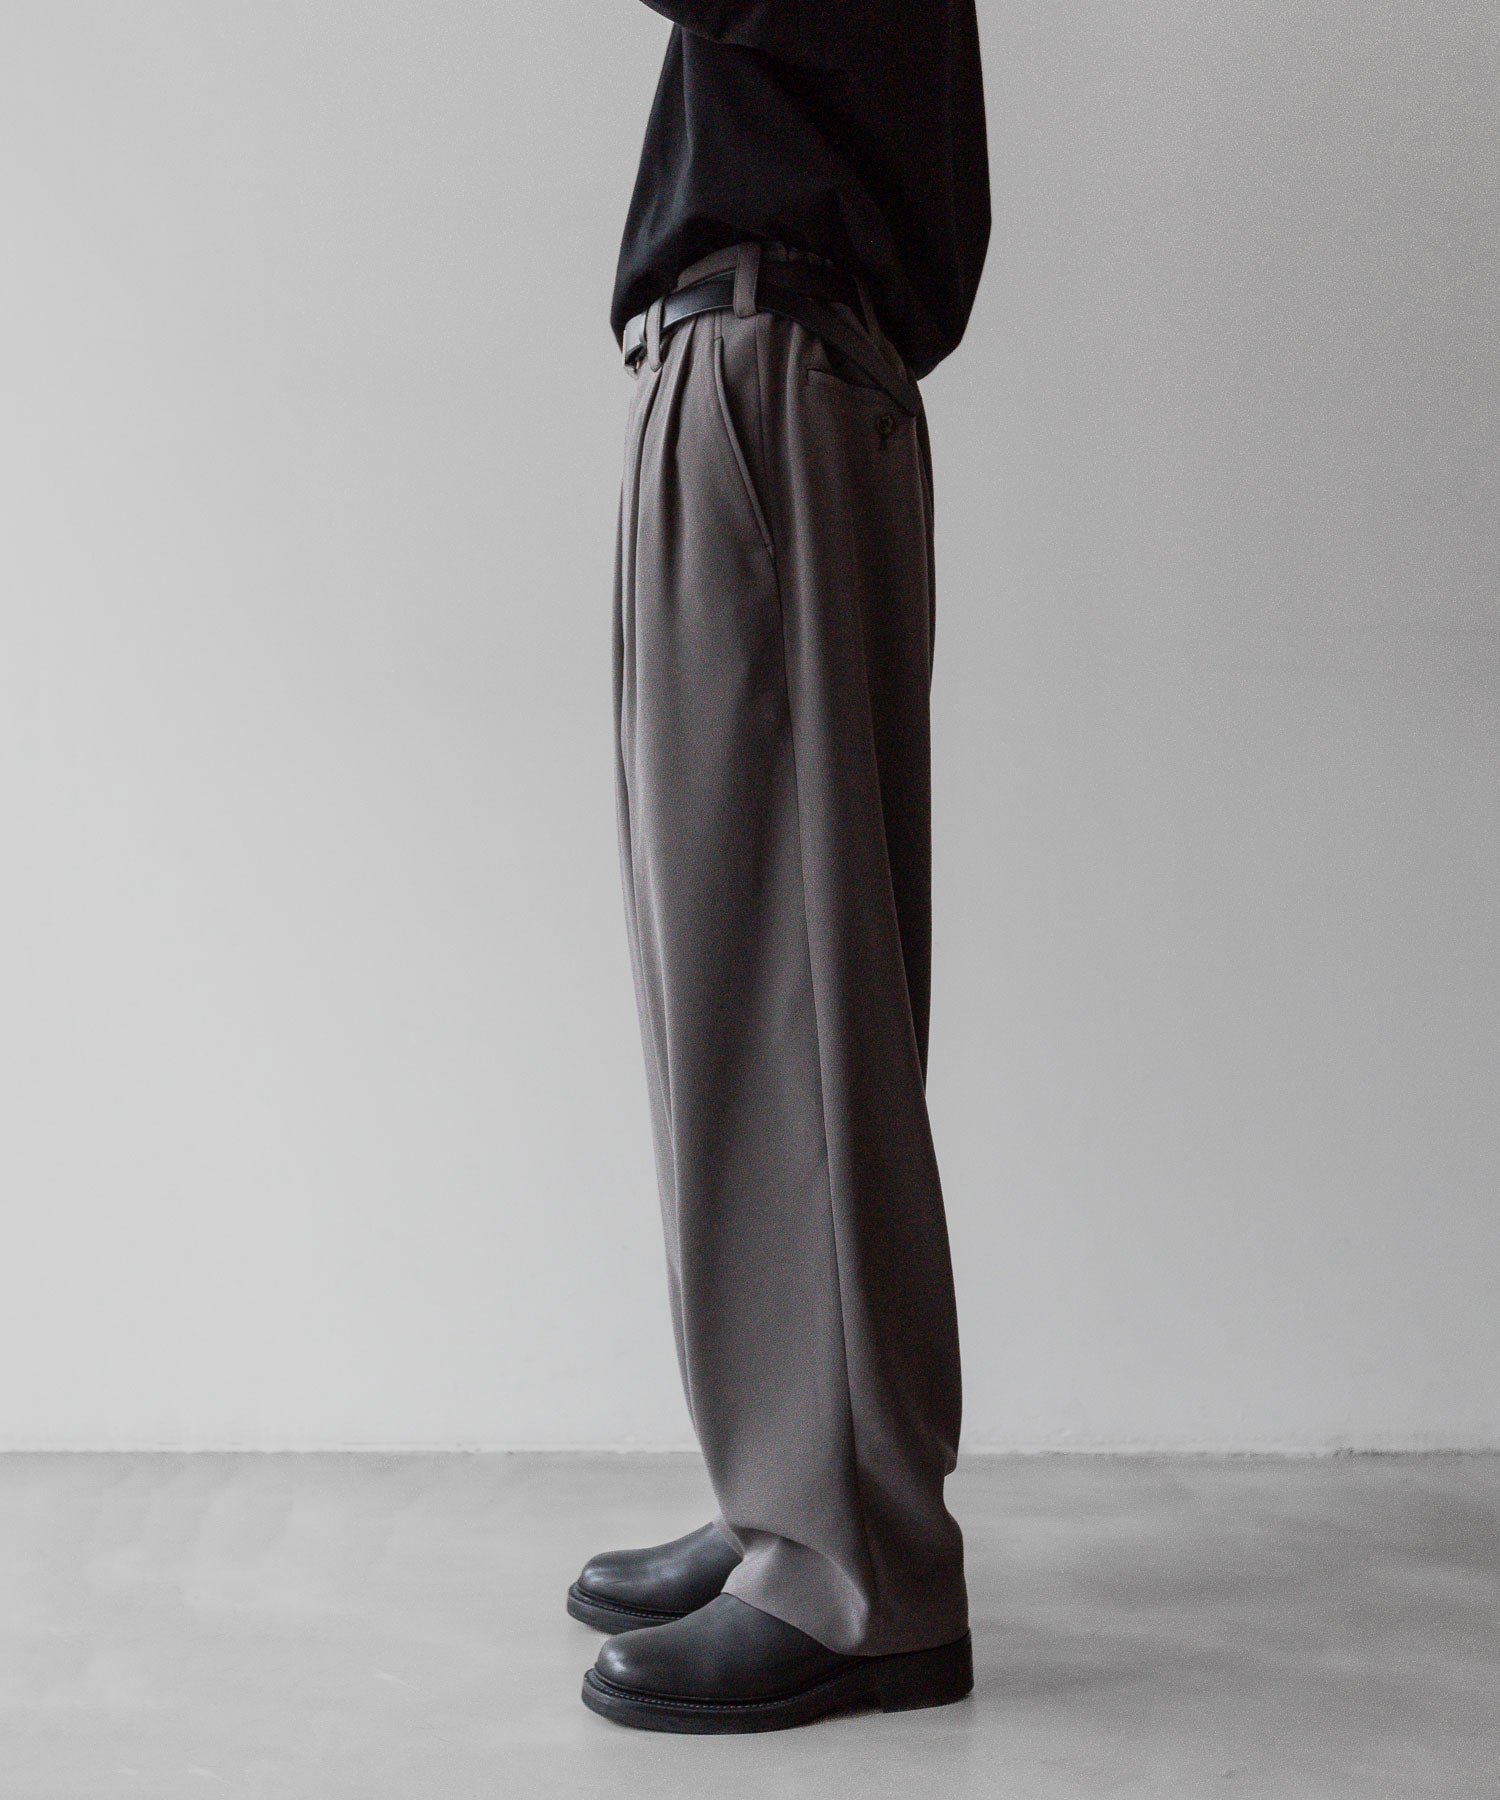 【UJOH】WIDE 2TUCK PANTS - OLIVE GREY